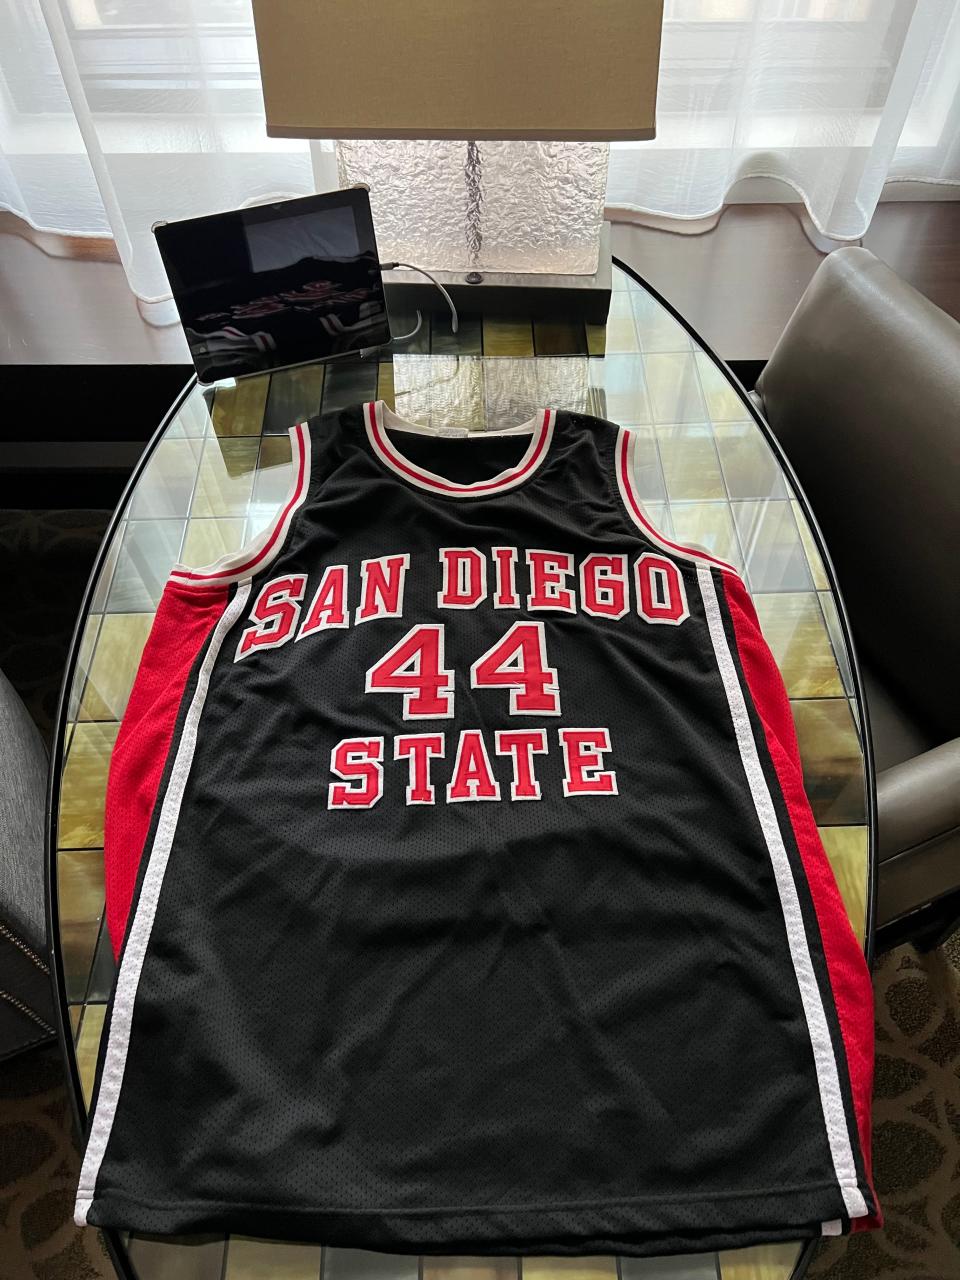 Thunder broadcaster and San Diego State alum Michael Cage will wear his No. 44 jersey Monday night in Houston, while rooting on the Aztecs against UConn in the NCAA men's basketball championship game.